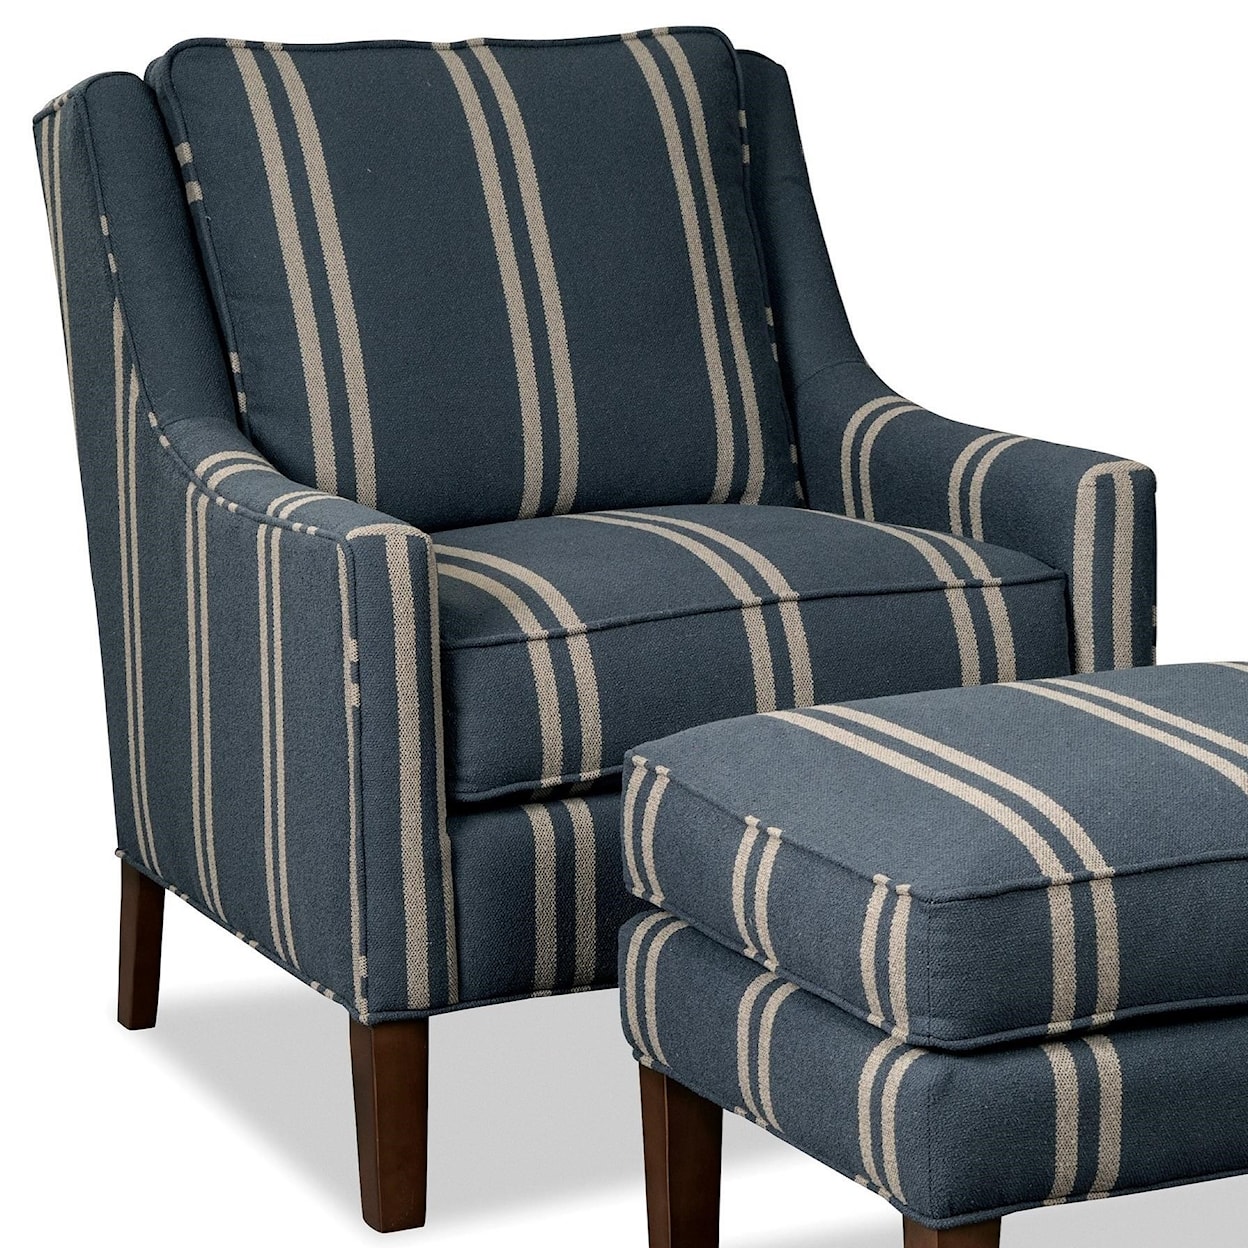 Paula Deen by Craftmaster Upholstered Chairs Accent Chair